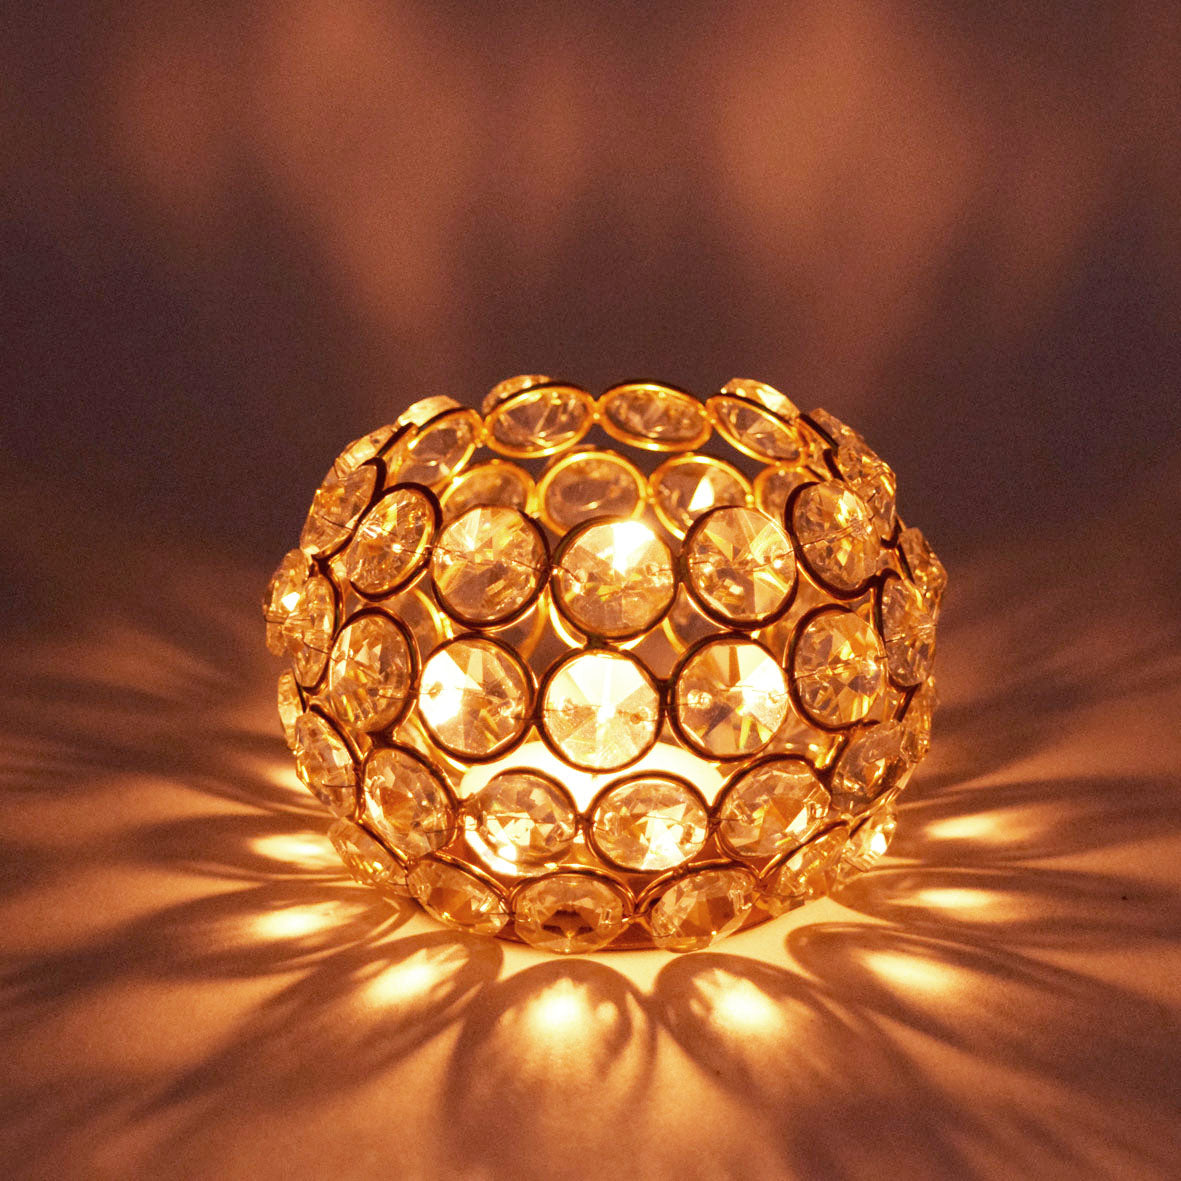 Crinds Crystal Ball Candle Lamp